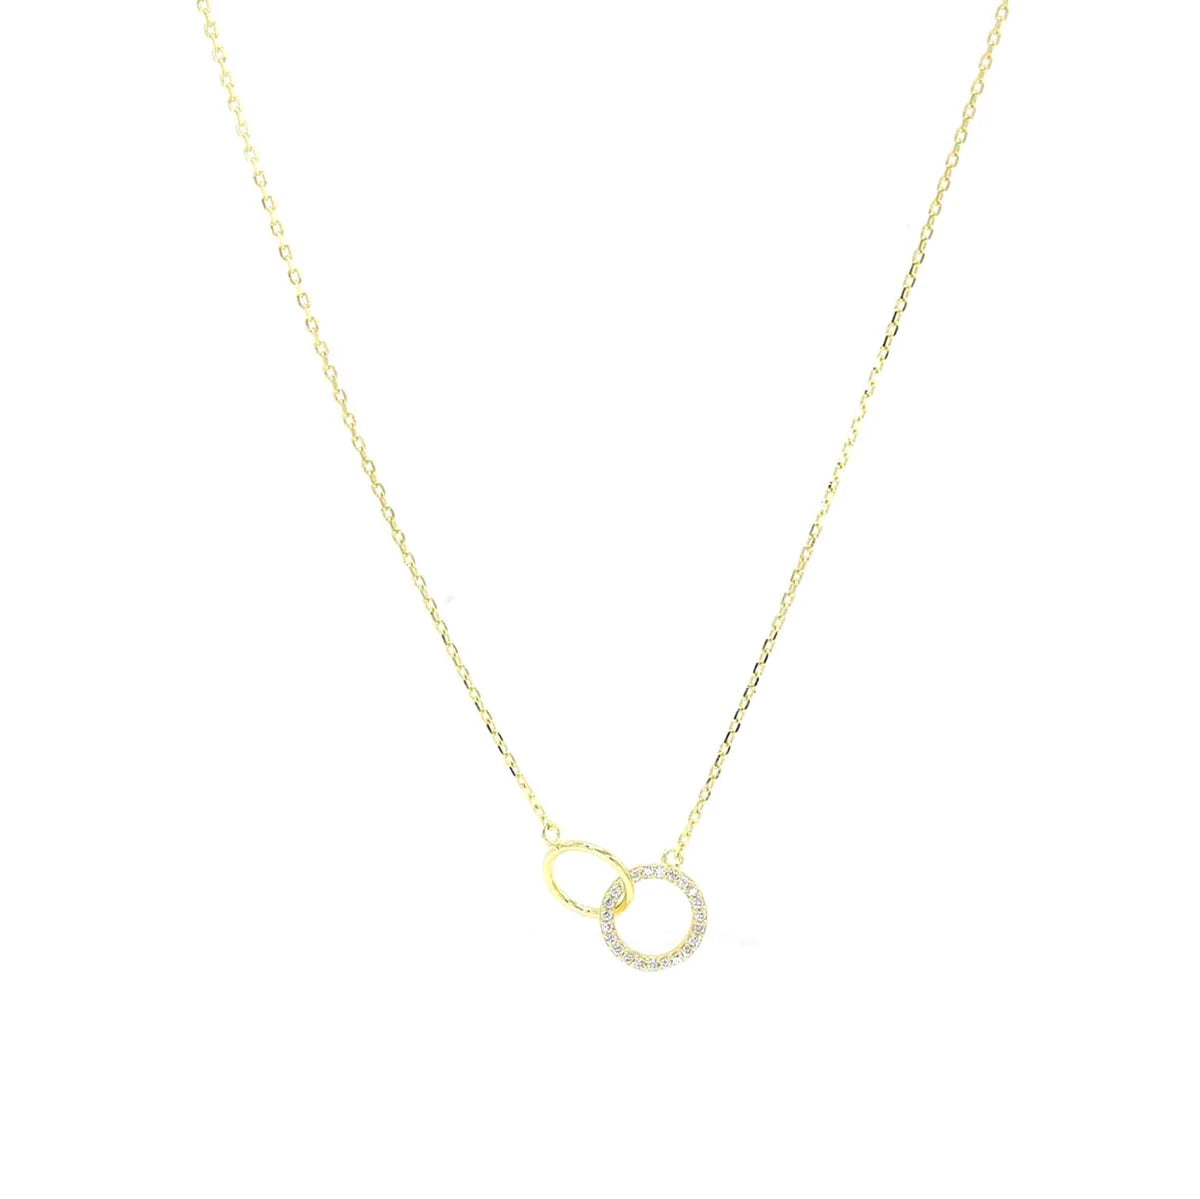 Circle necklace gold plated .925 sterling silver waterproof love circle, infinity circle necklace, valentines gift ideas. dainty necklaces for everyday. Necklaces that say I love you. Casual dainty necklaces. Influencer style necklaces trending on instagram and tiktok. Famous instagram jewelry brands to follow. Kesley Boutique